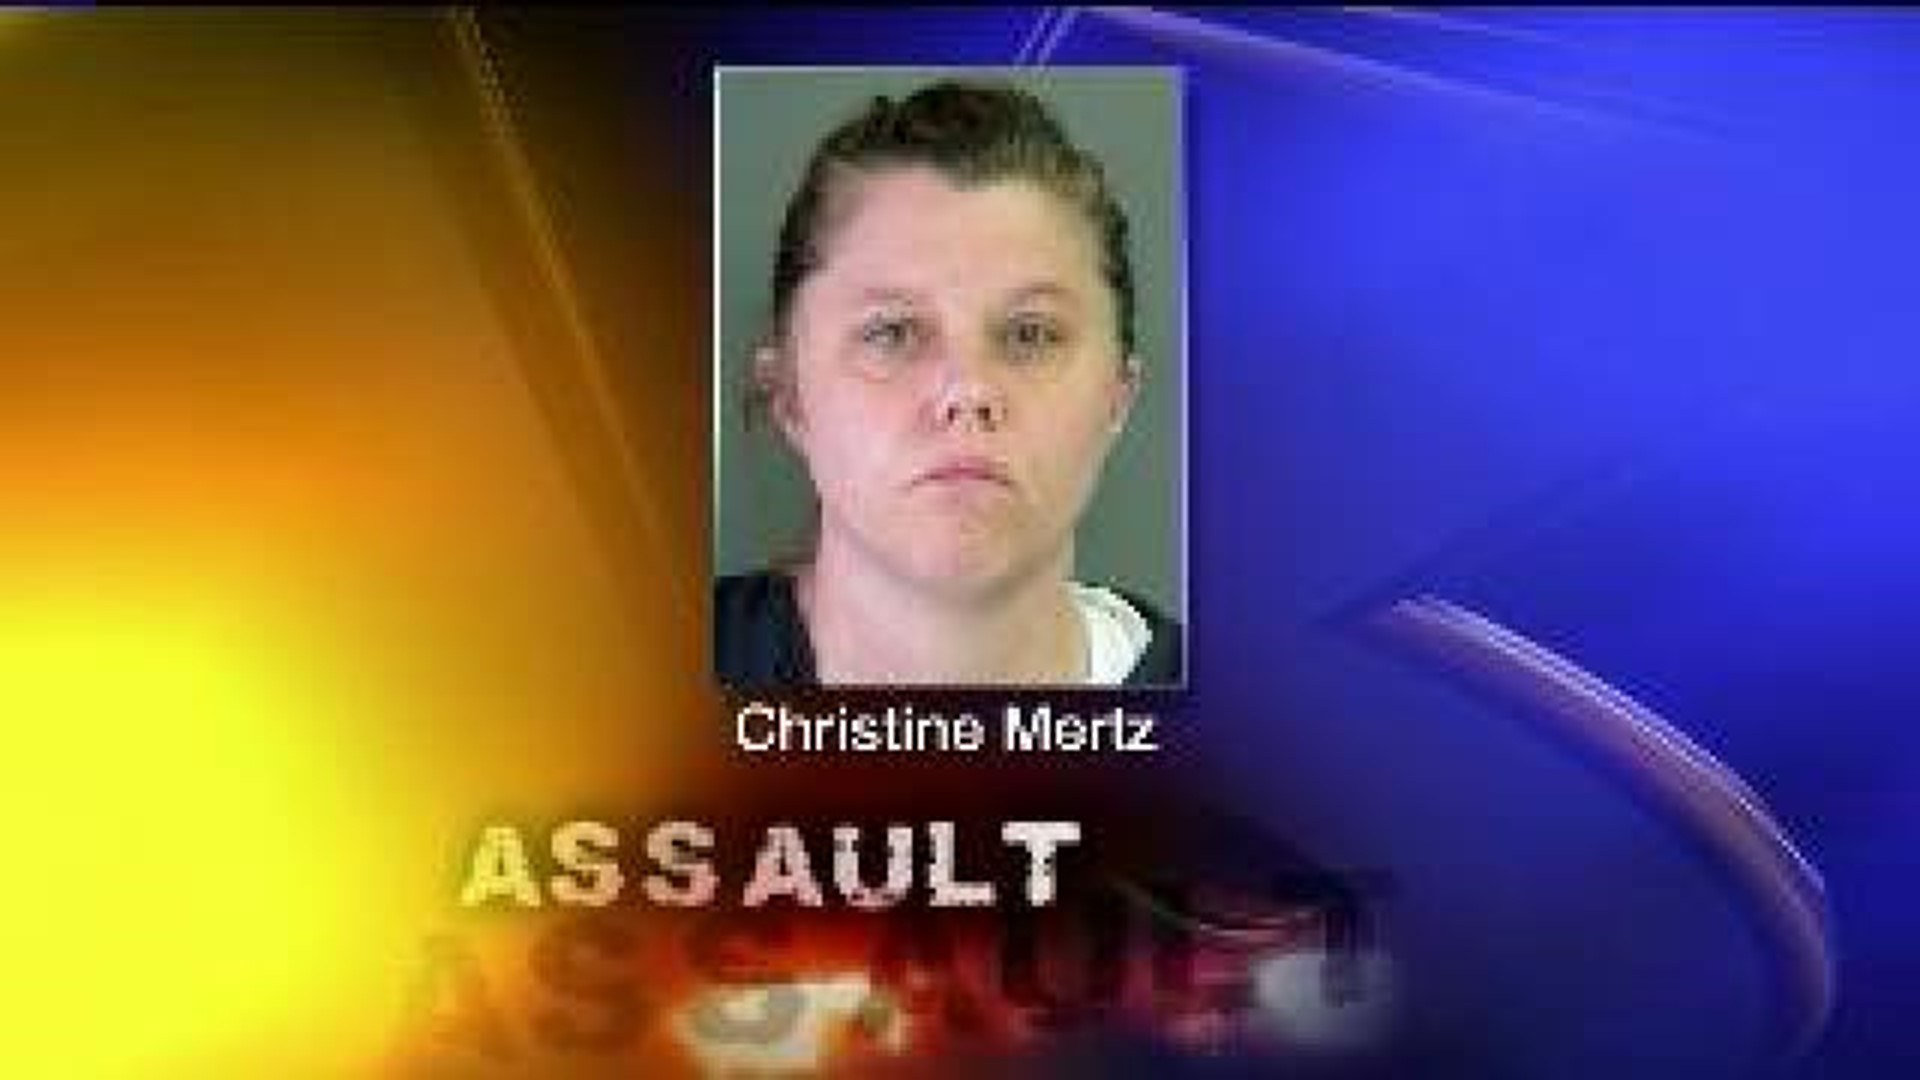 Cops: Woman Assaulted Child With Baseball Bat